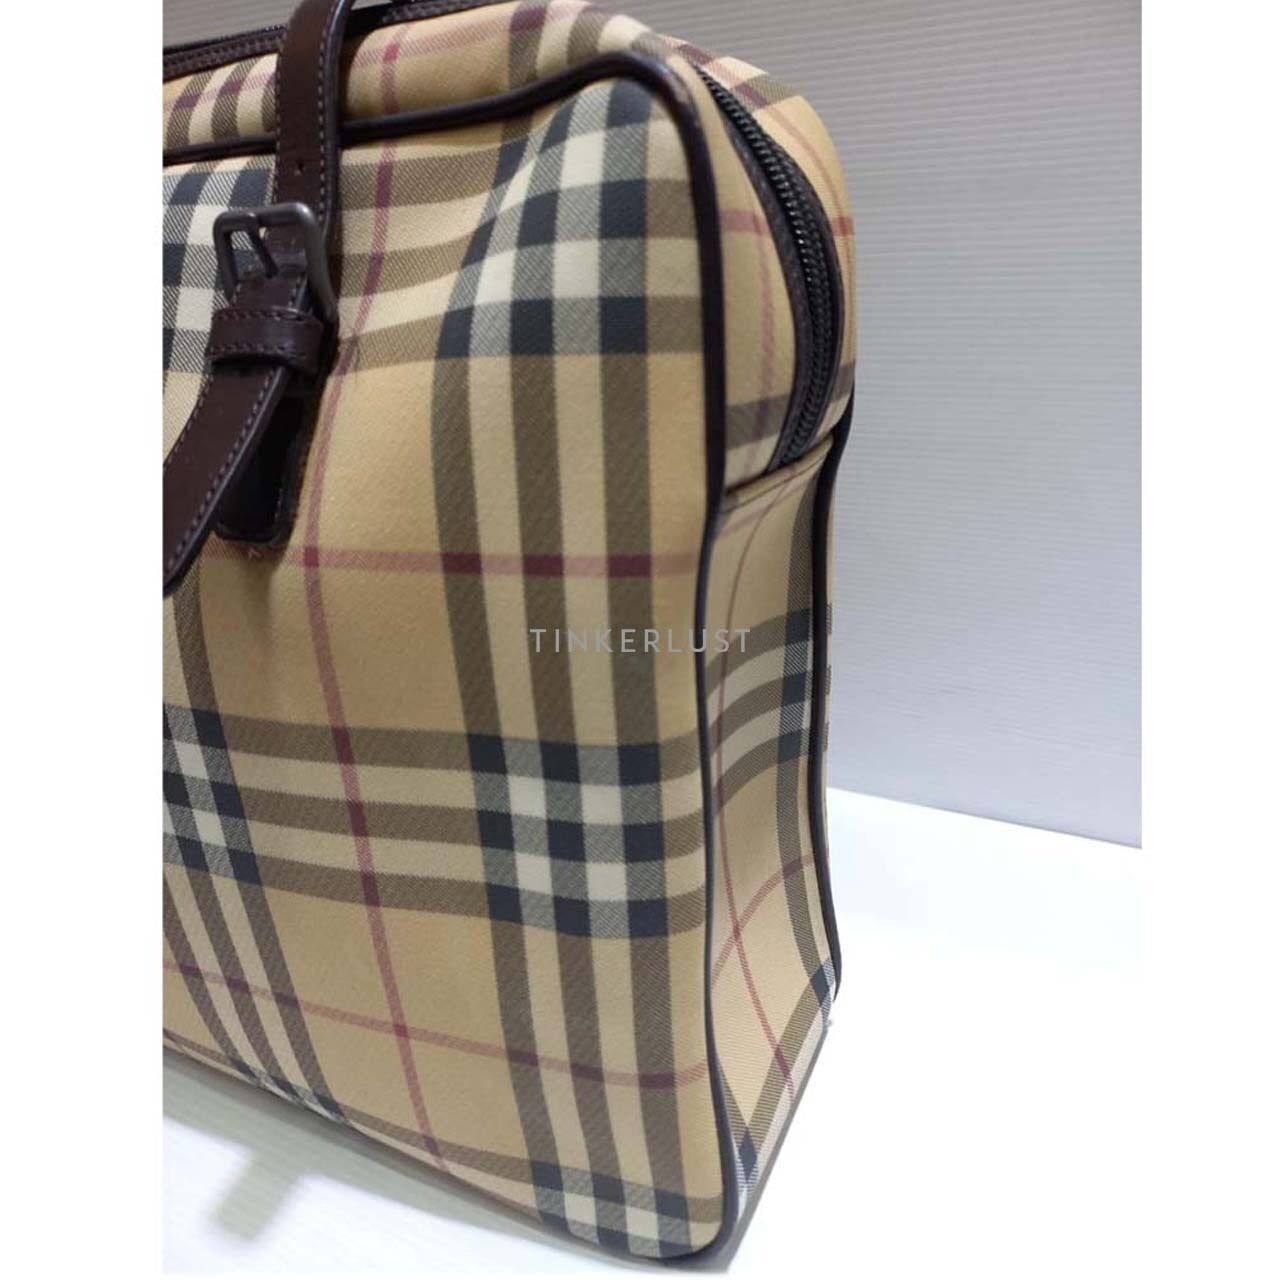 Burberry Box Vintage Canvas Leather Beige Tote Bag